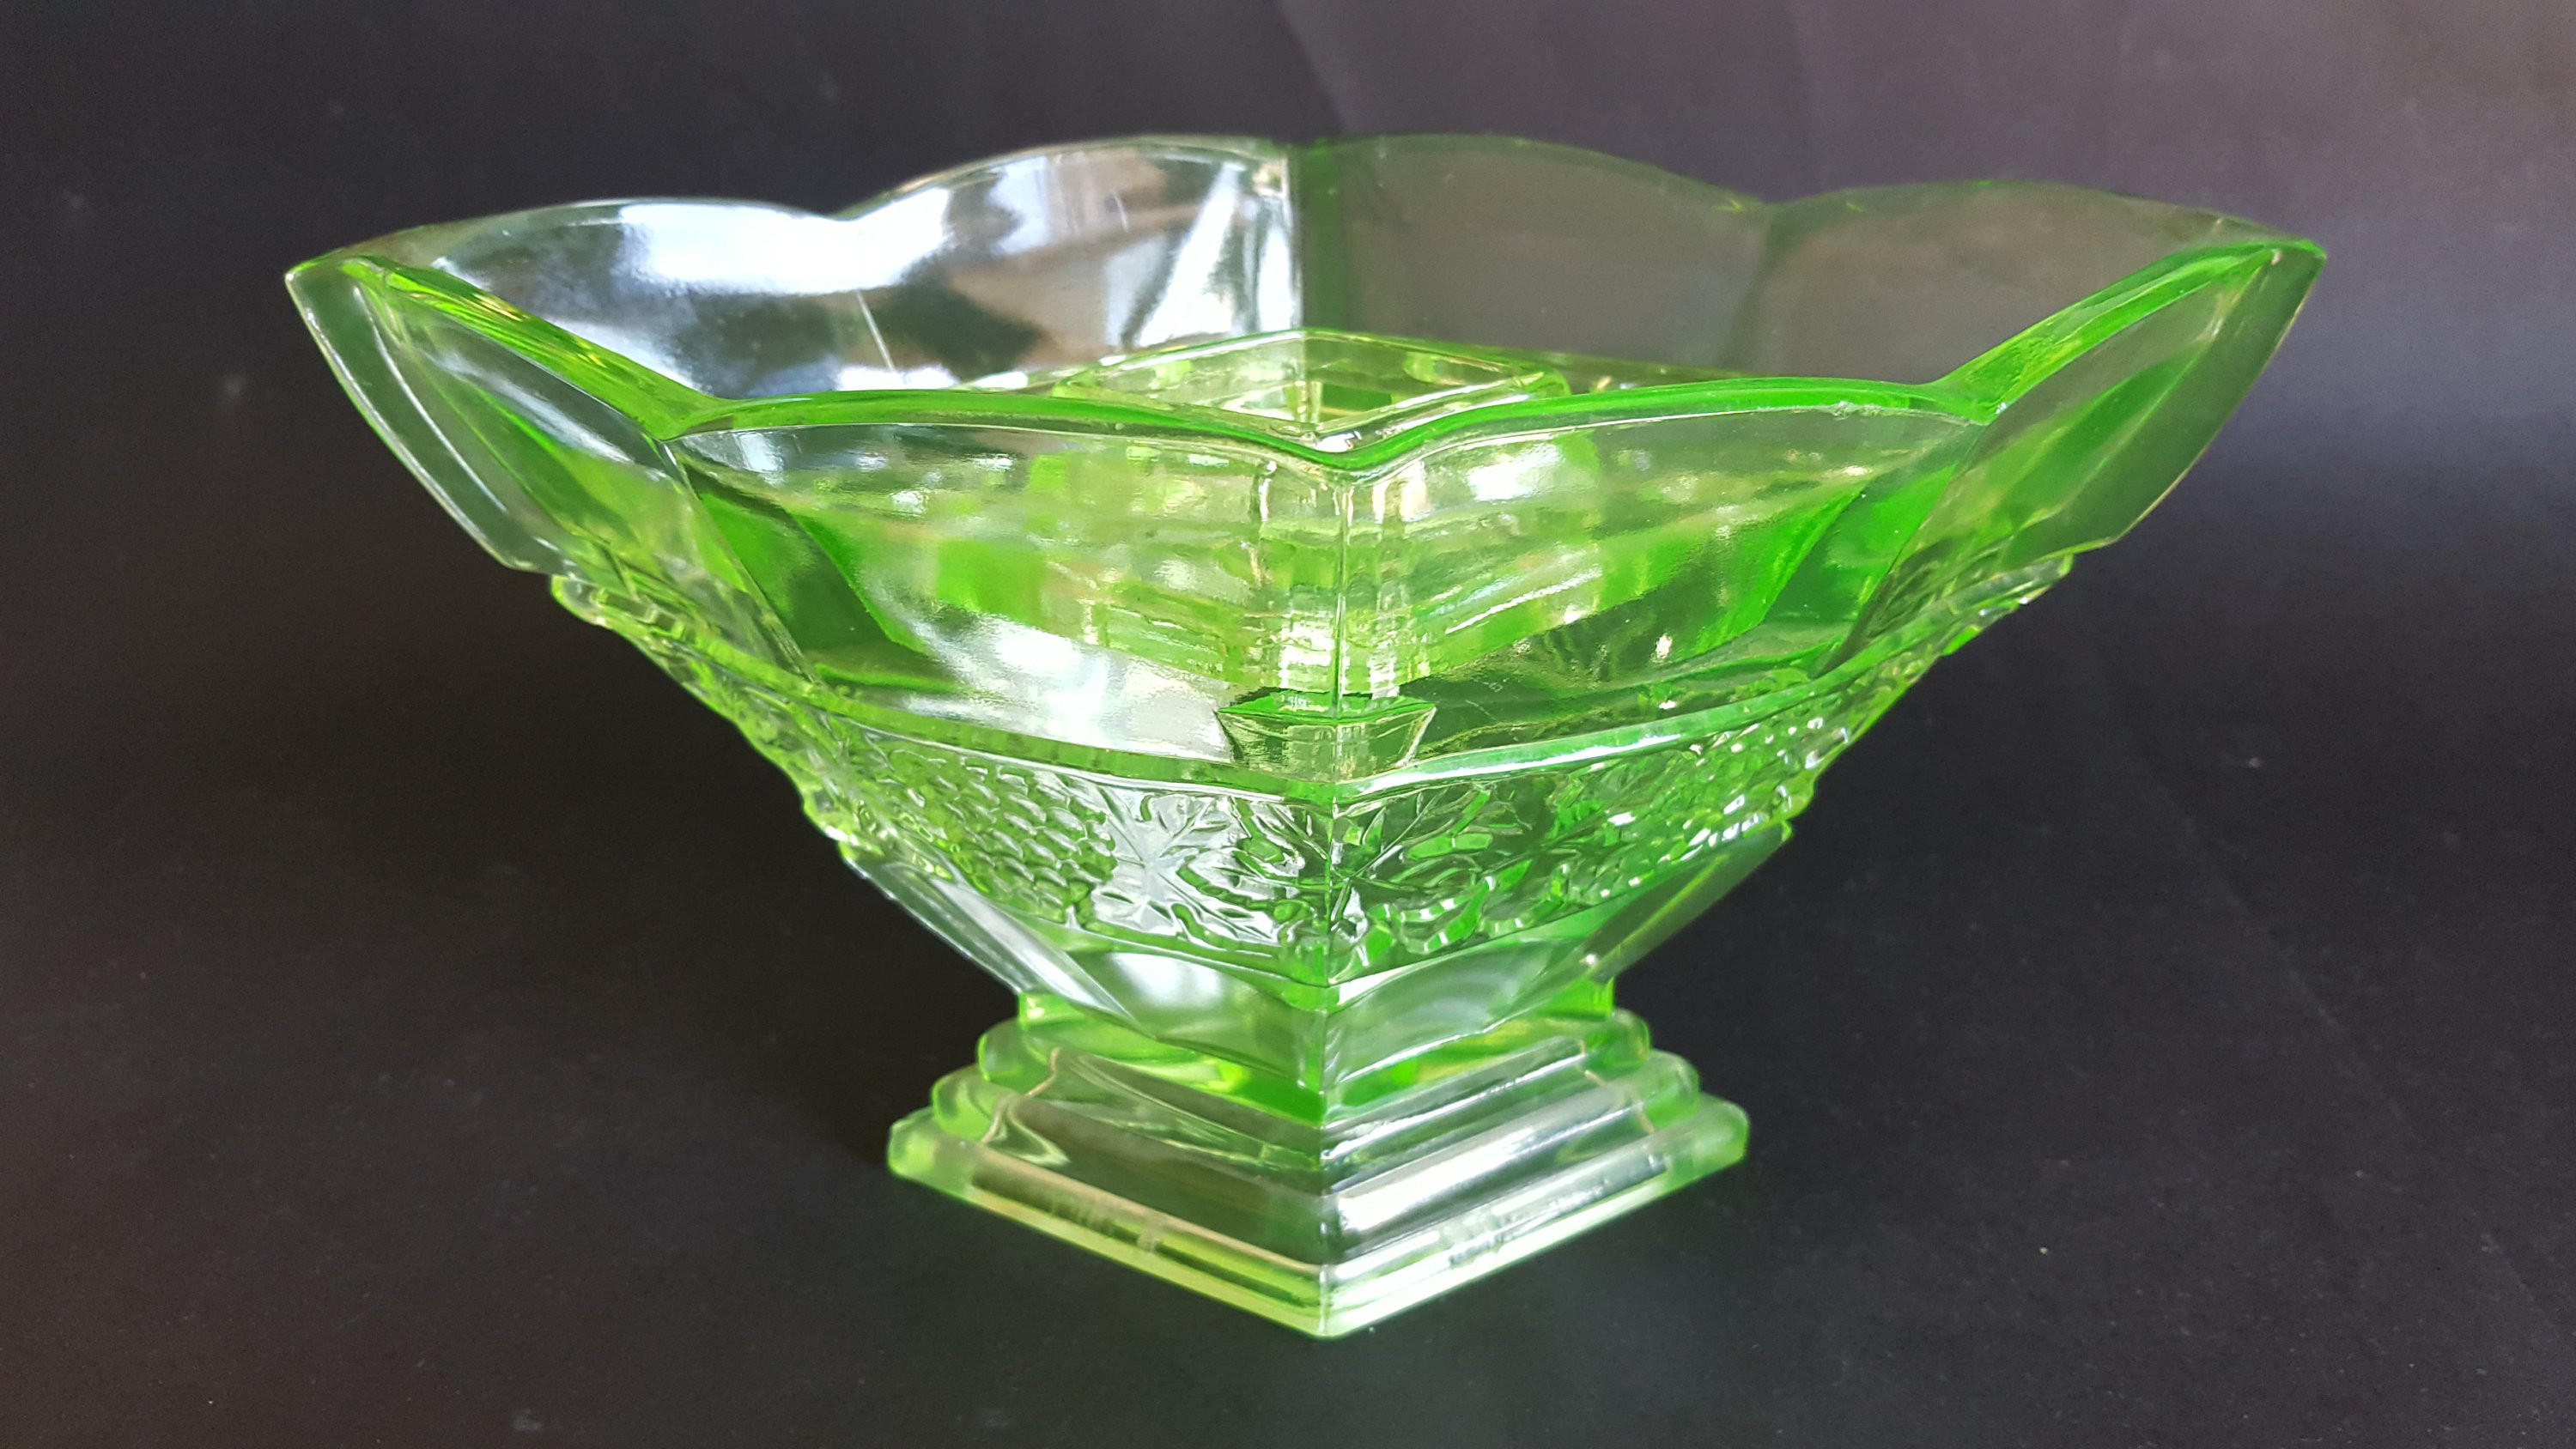 26 Great Large Brandy Snifter Vase 2024 free download large brandy snifter vase of beautiful art deco uranium green polished glass bernsdorf etsy with regard to image 0 image 1